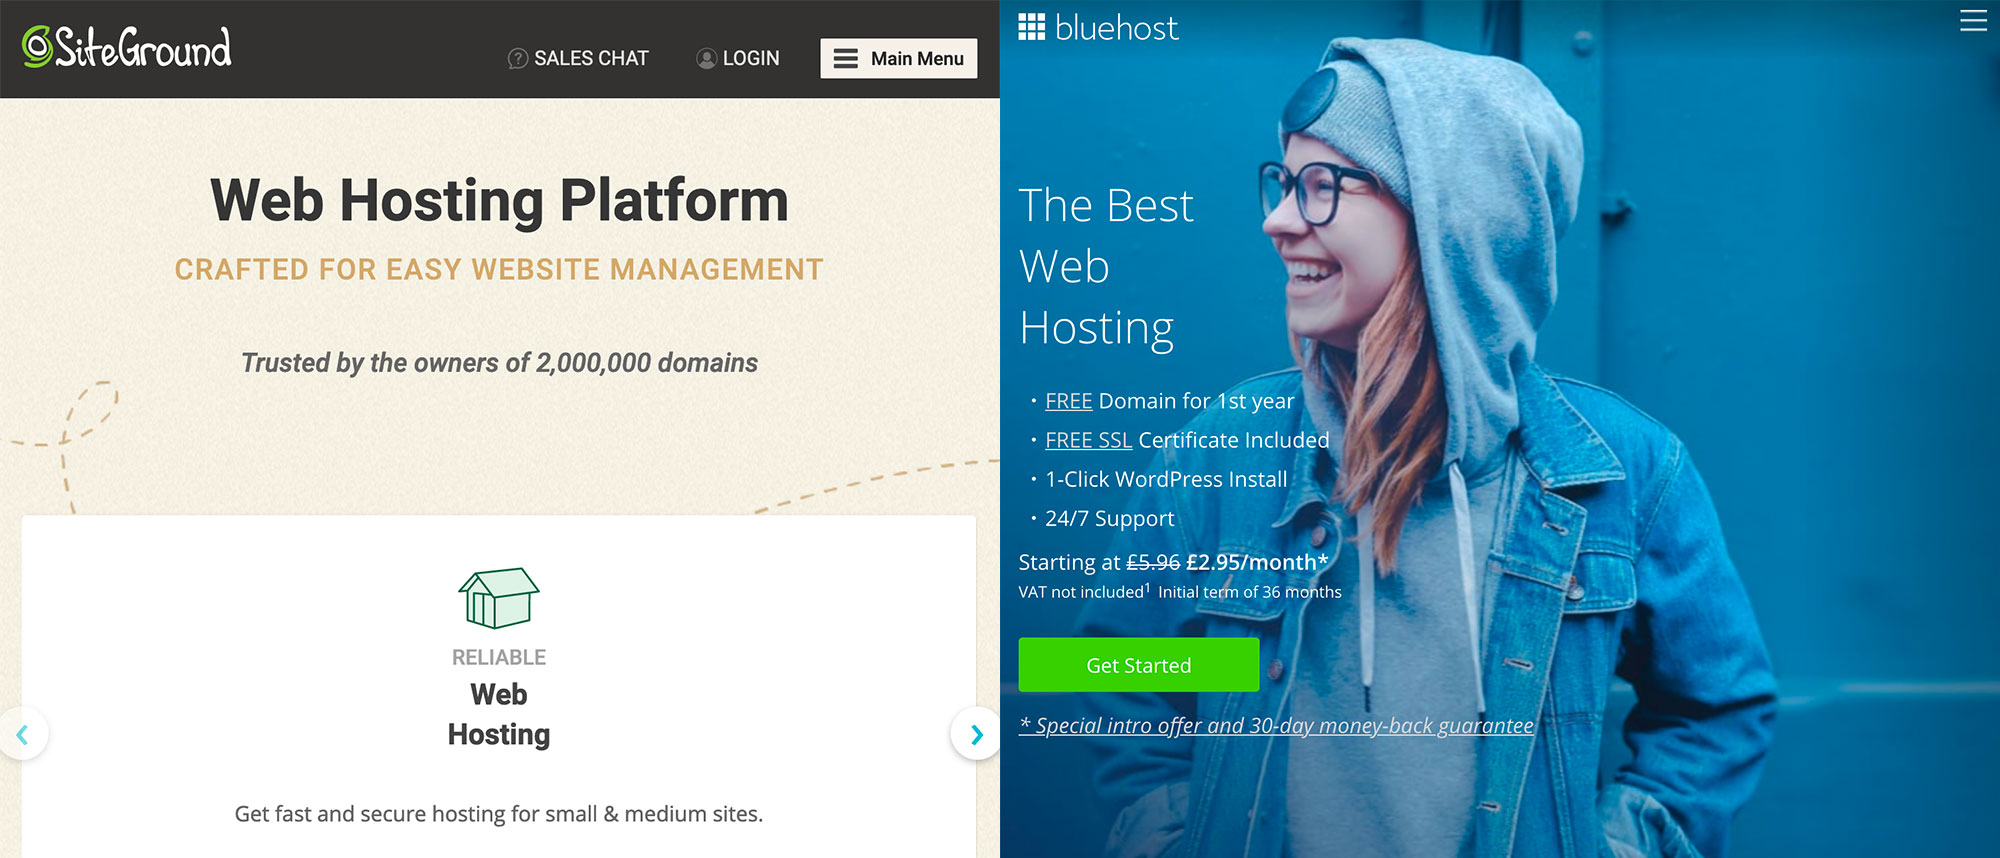 SiteGround or Bluehost?